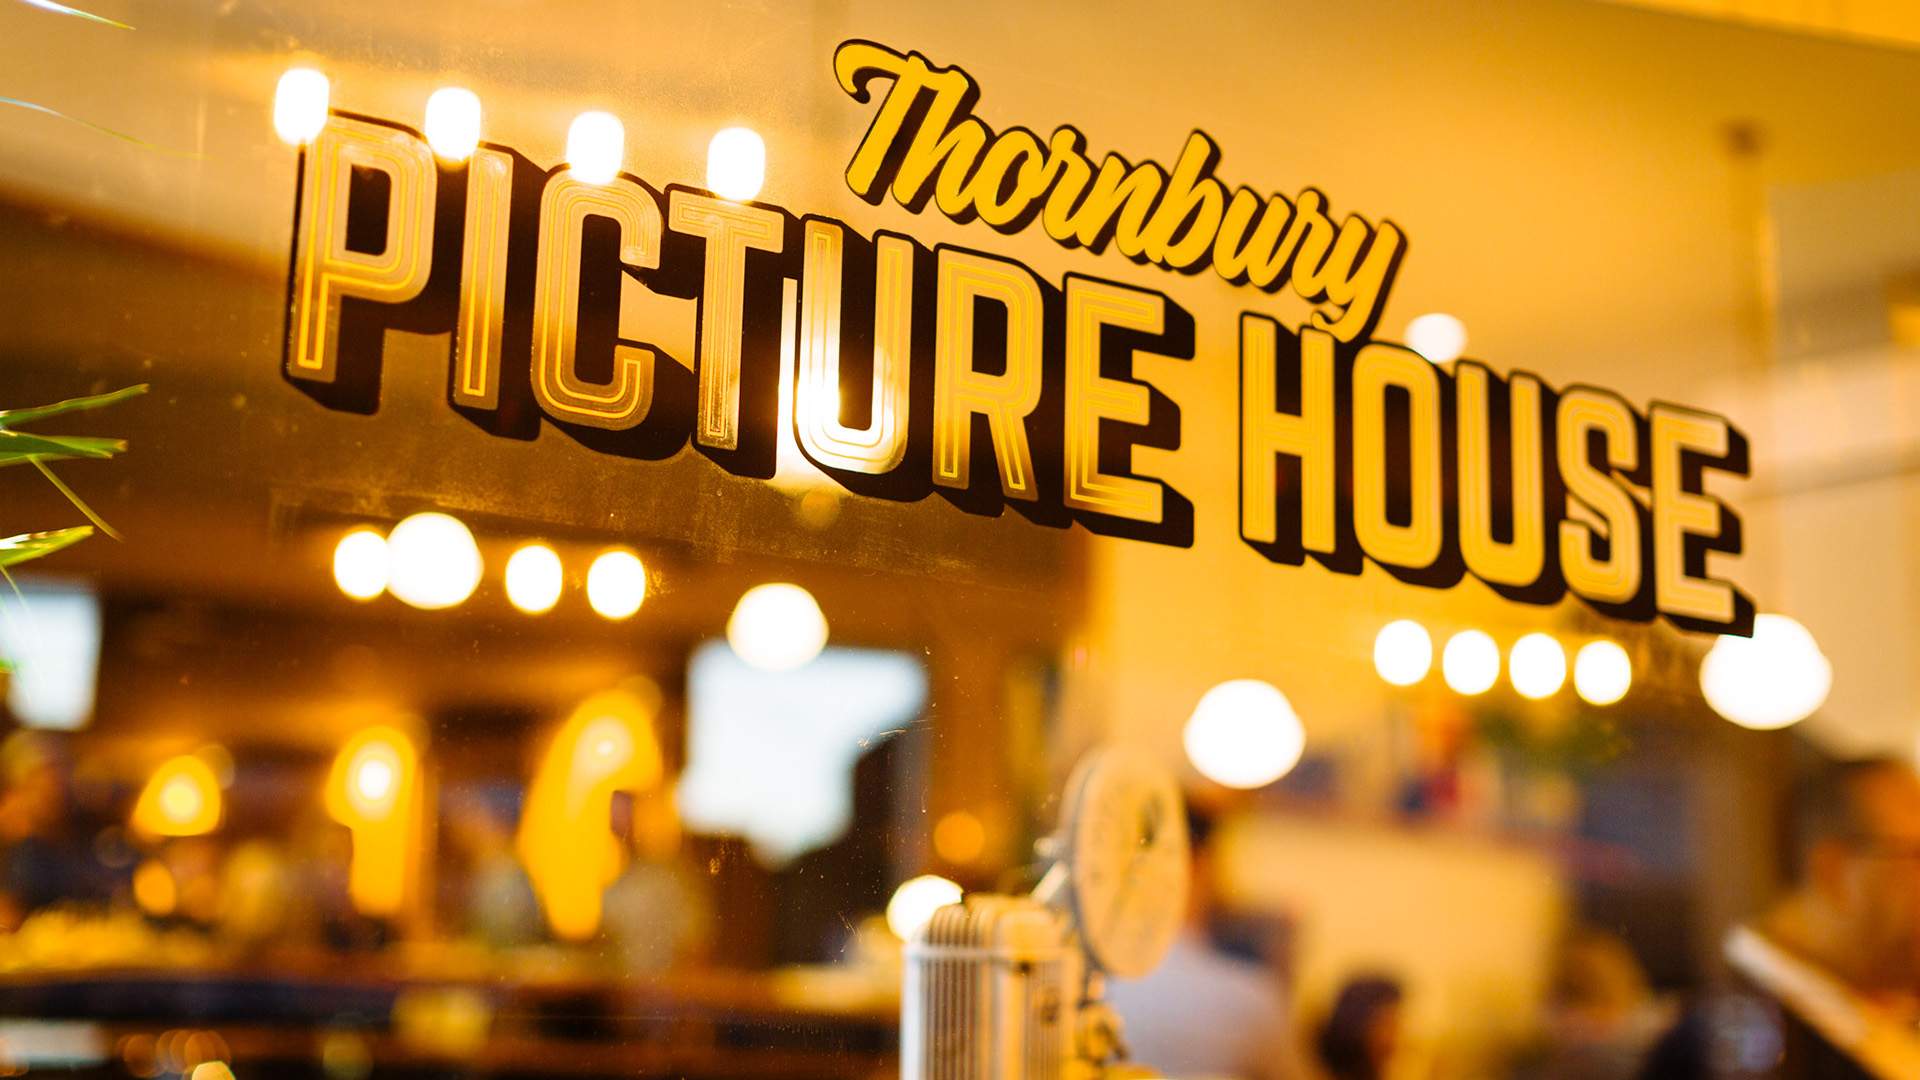 Thornbury Picture House Is Melbourne's New Retro-Style Independent Cinema